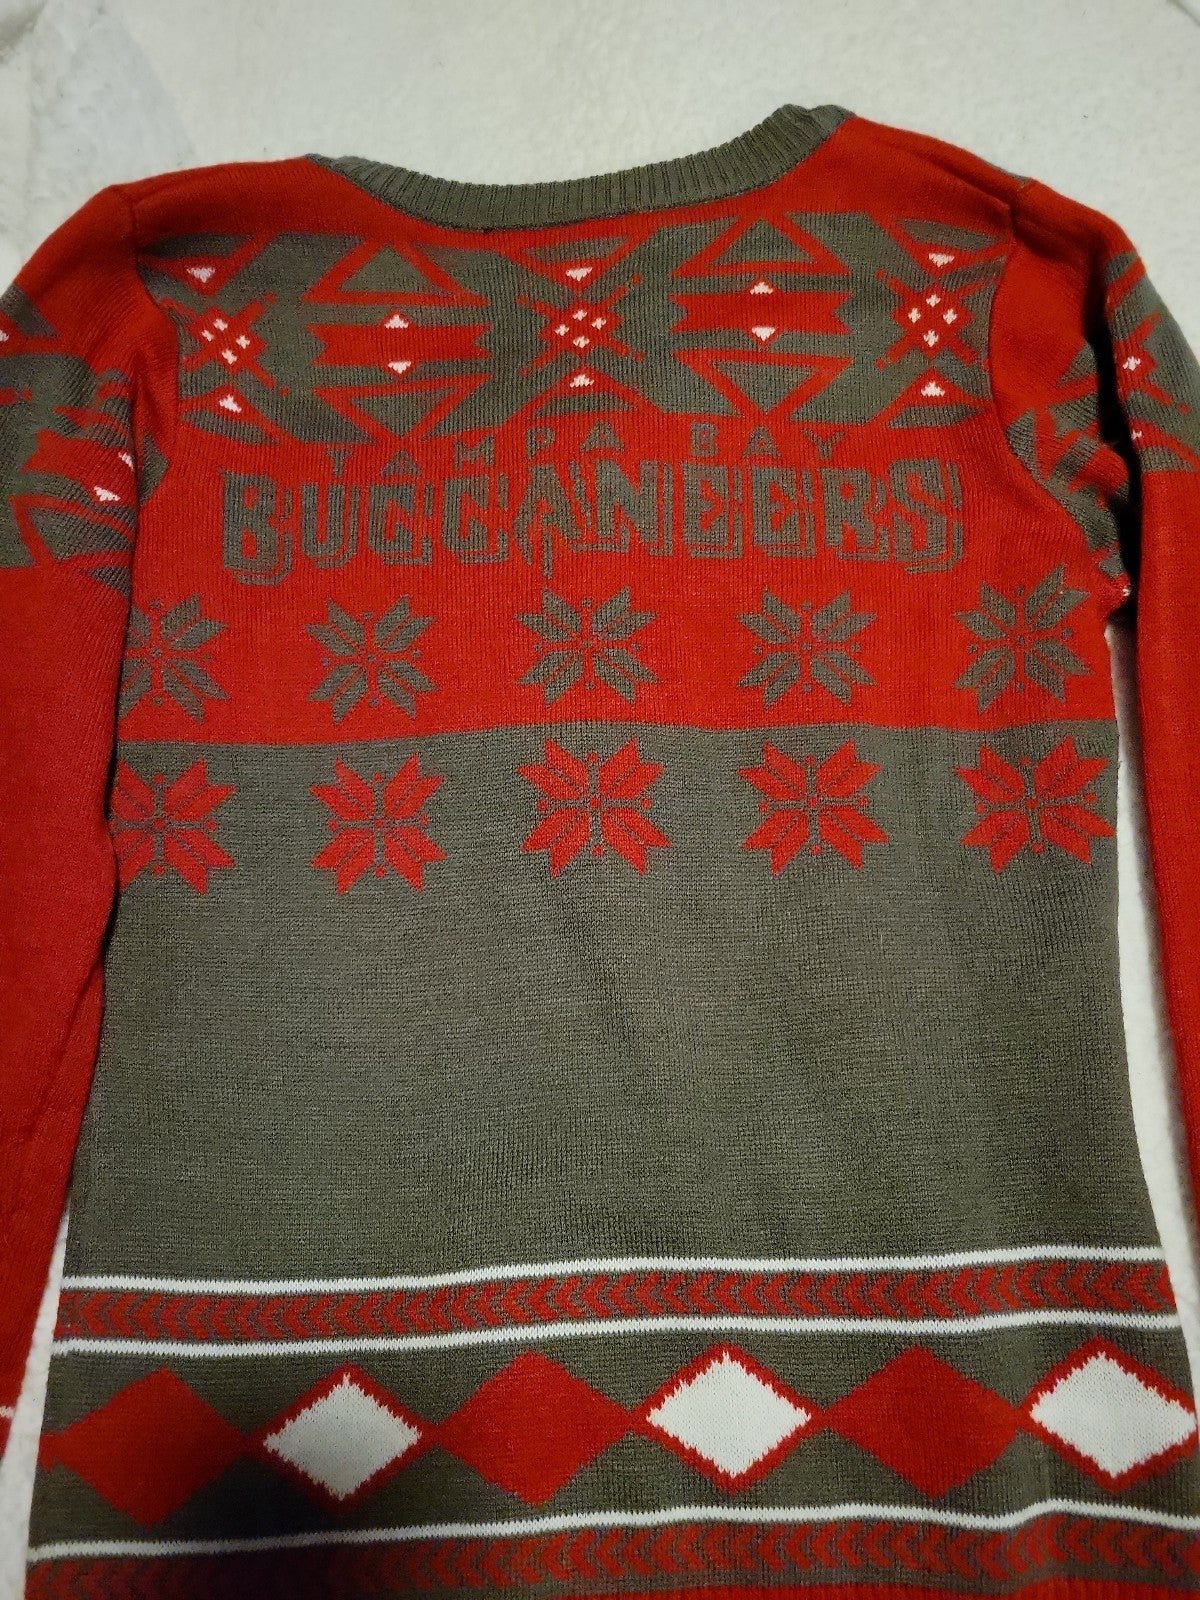 large discount Tampa Bay Buccaneers womens Christmas sweater Ht3HOJZm4 for sale